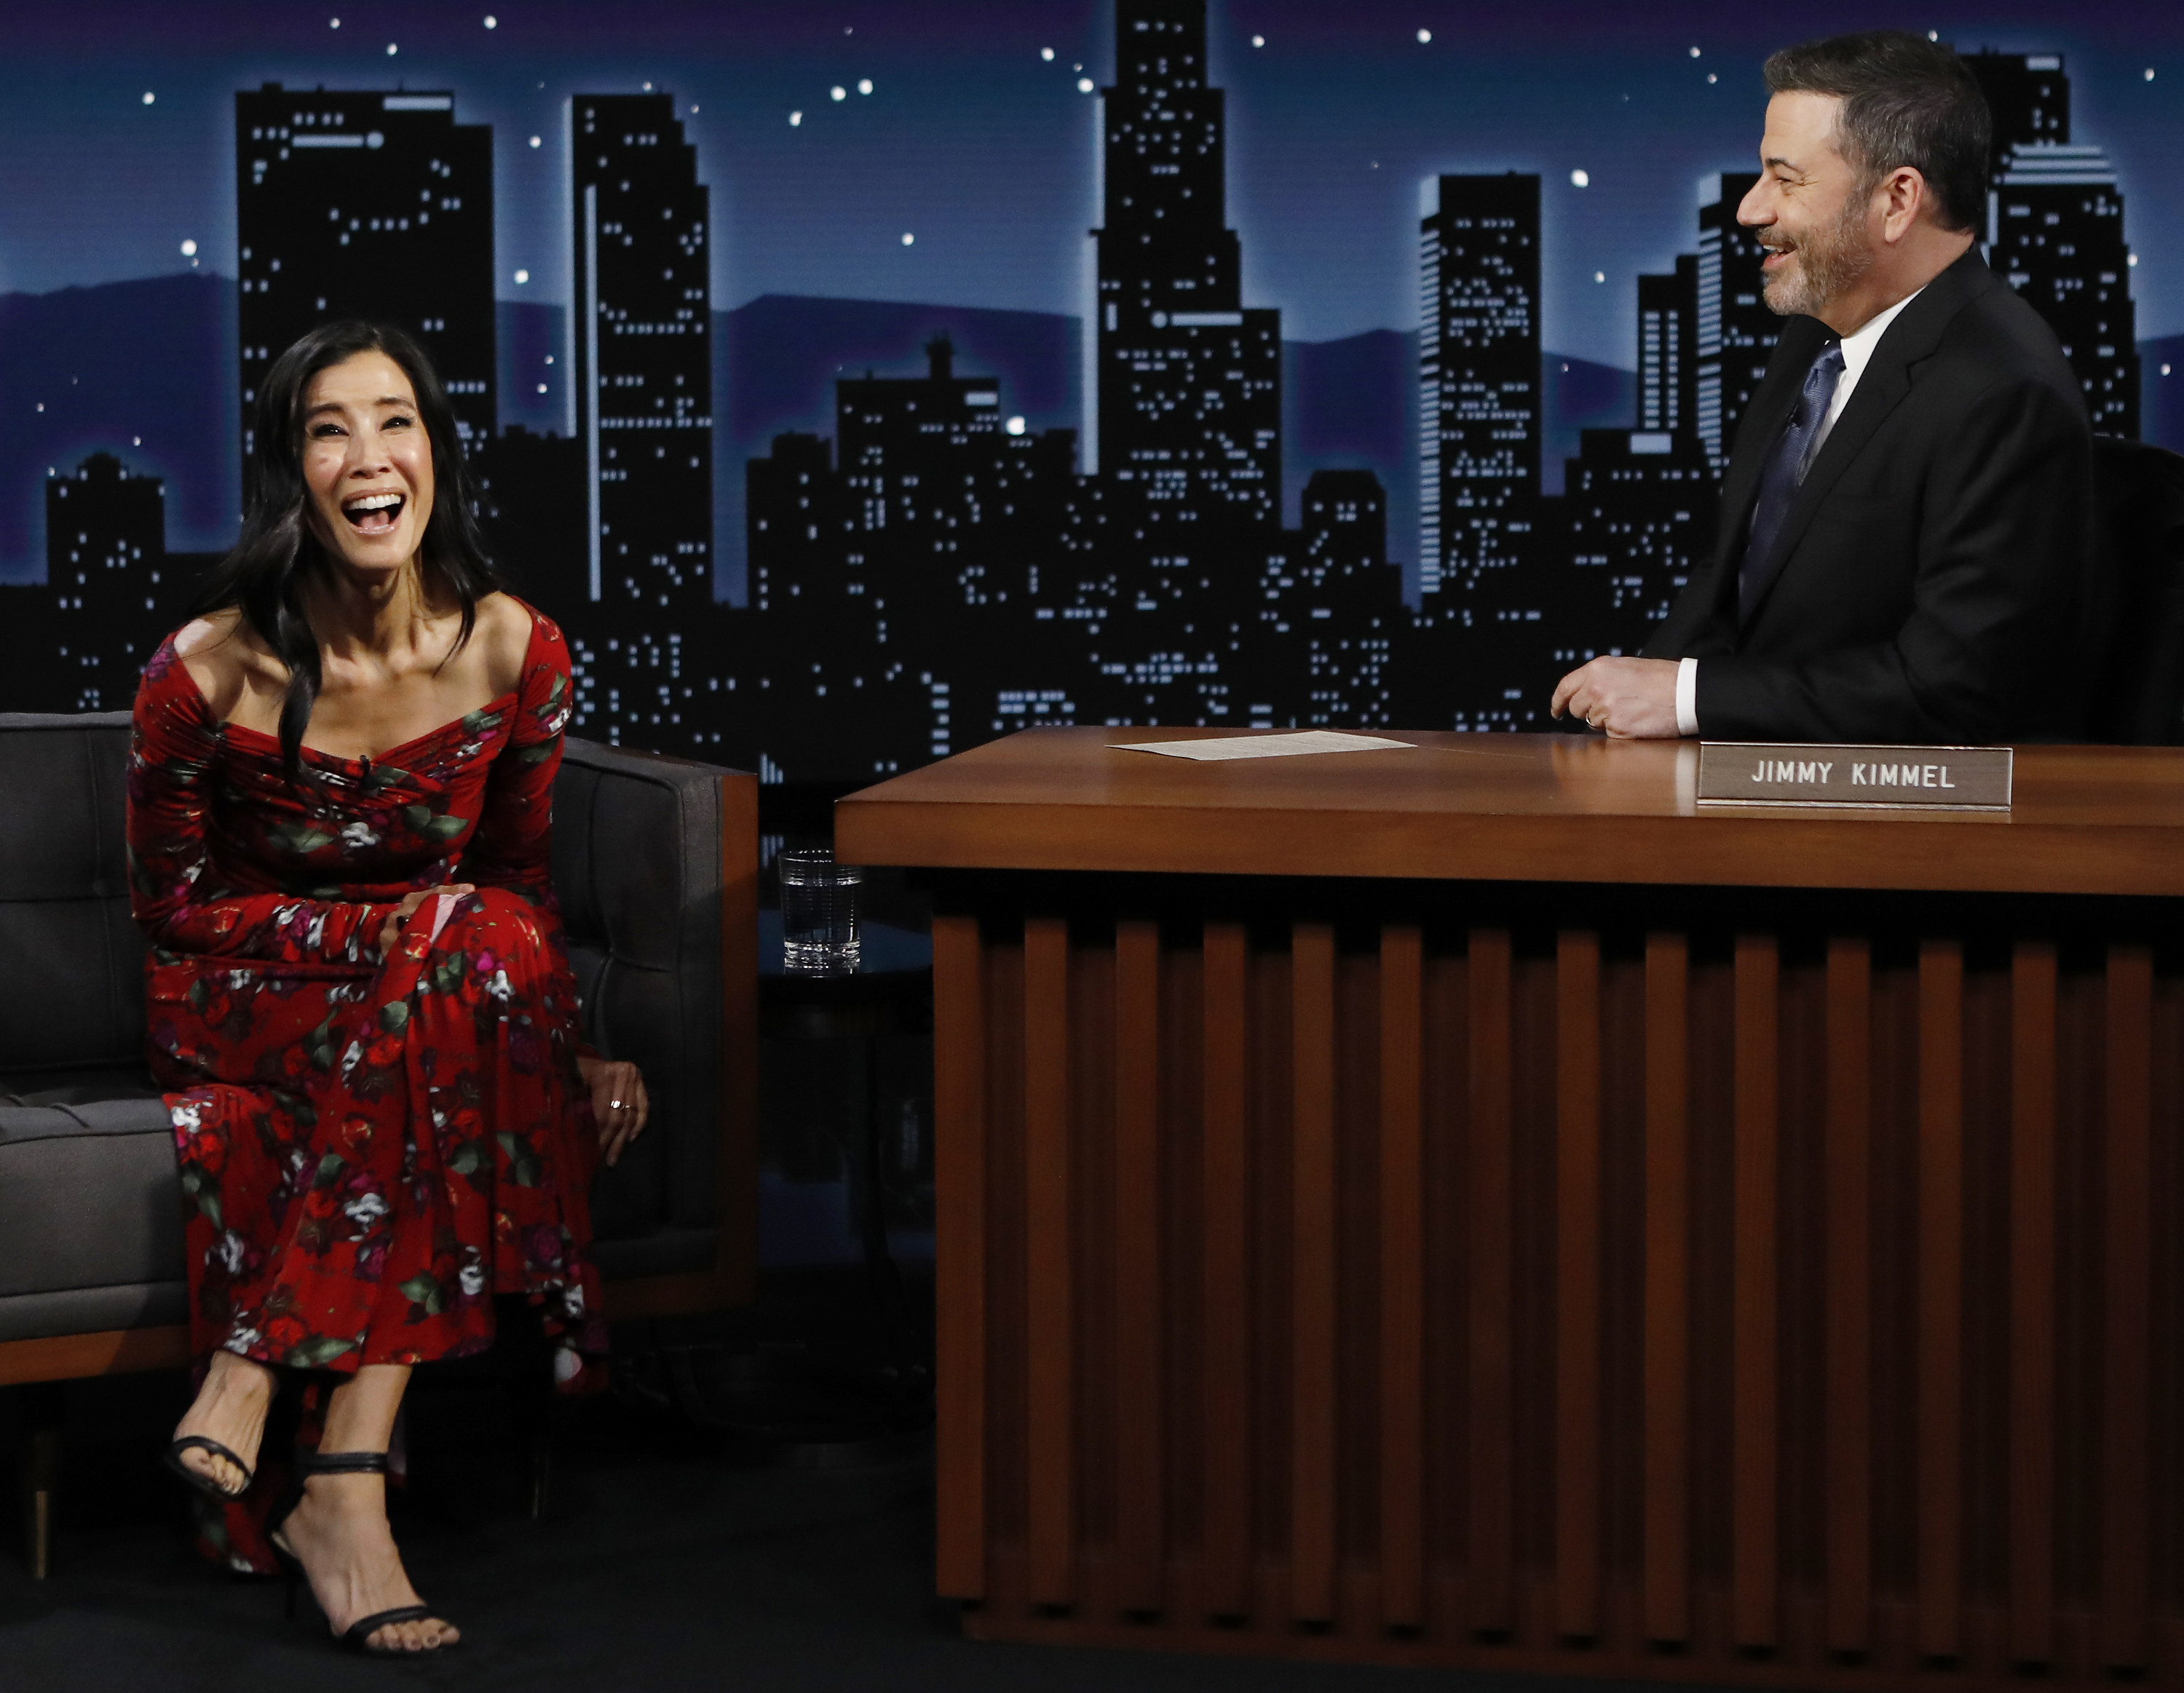 Lisa laughs while sitting next to Jimmy